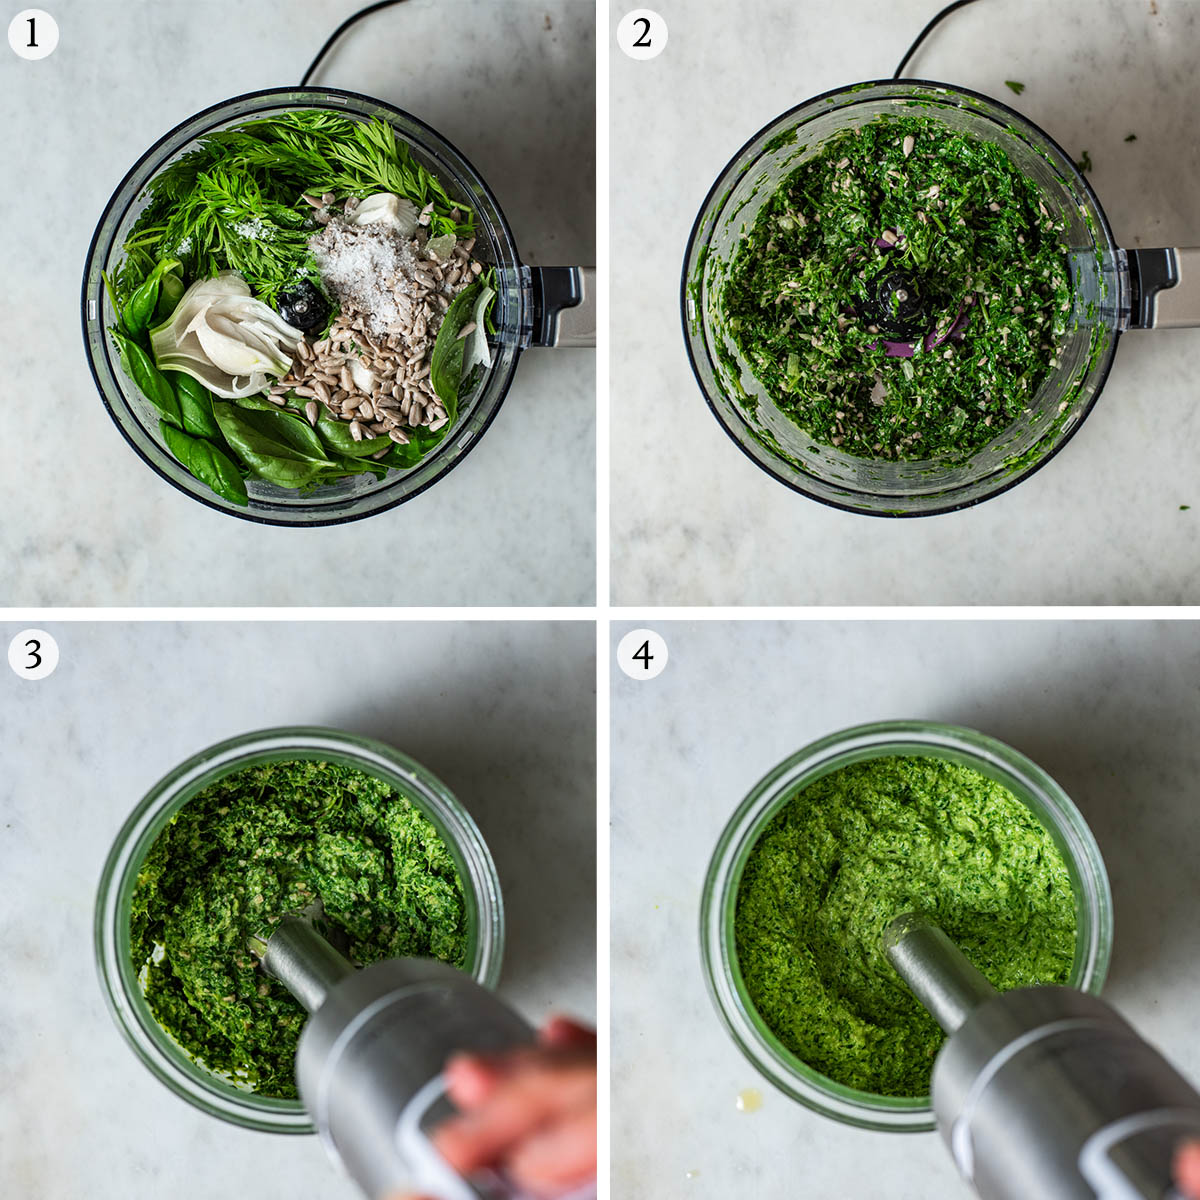 Carrot greens pesto steps 1 to 4, mixing and blending in oil.